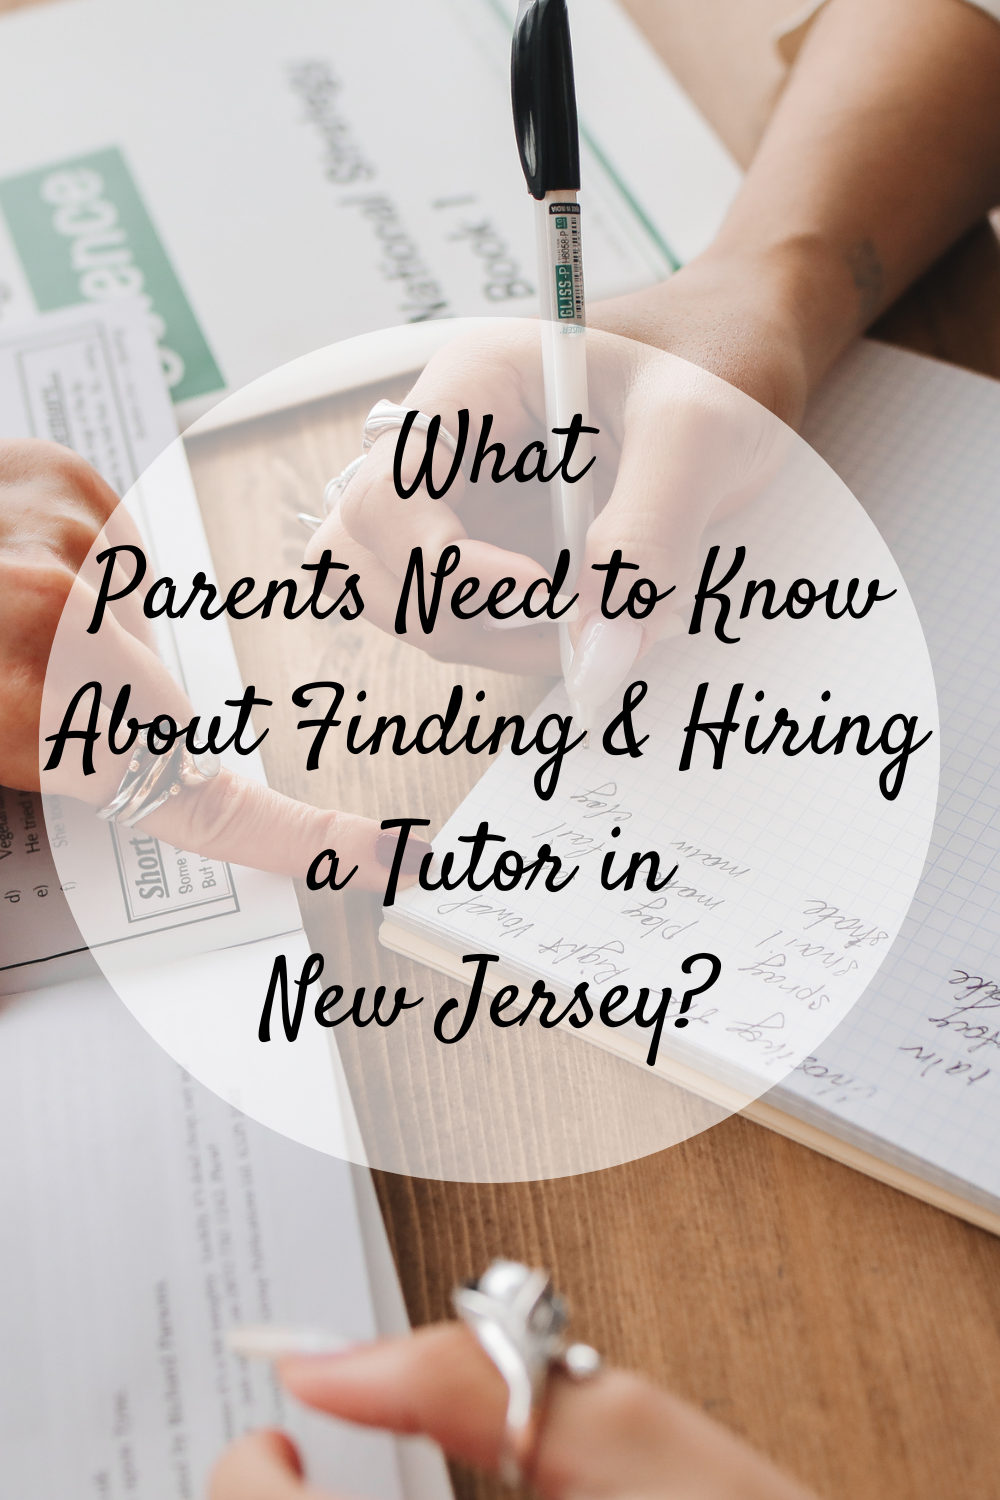 What Parents Need to Know About Finding & Hiring a Tutor in New Jersey?